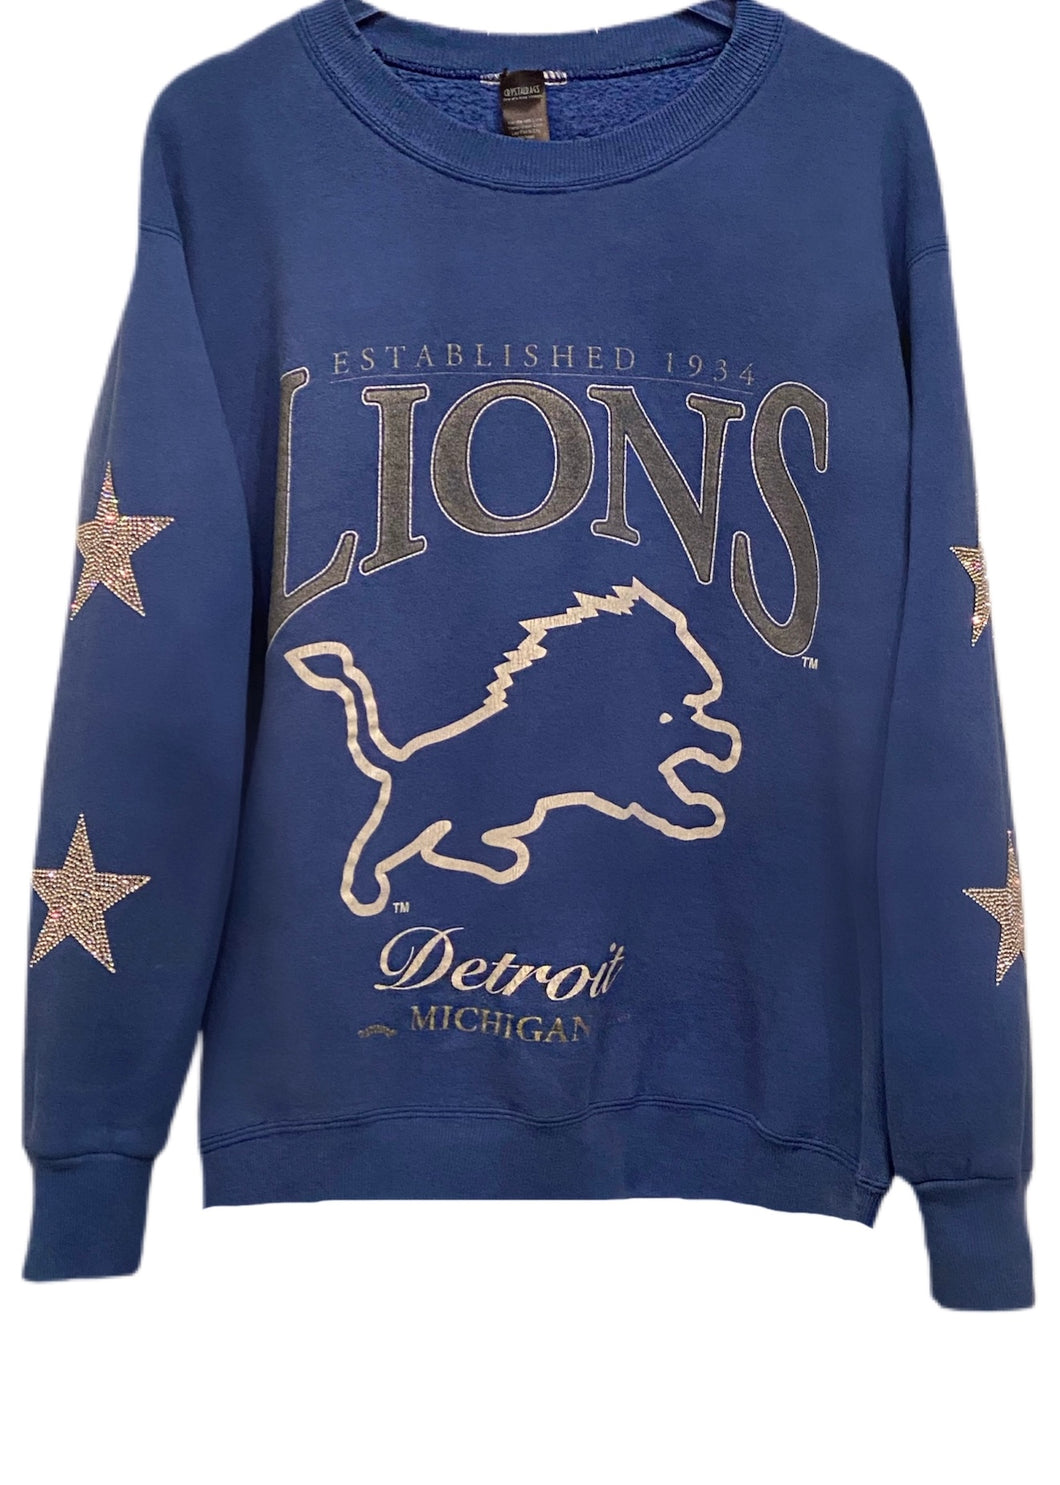 Detroit, Michigan Lions, NFL One of a KIND Vintage Sweatshirt with Crystal Star Design